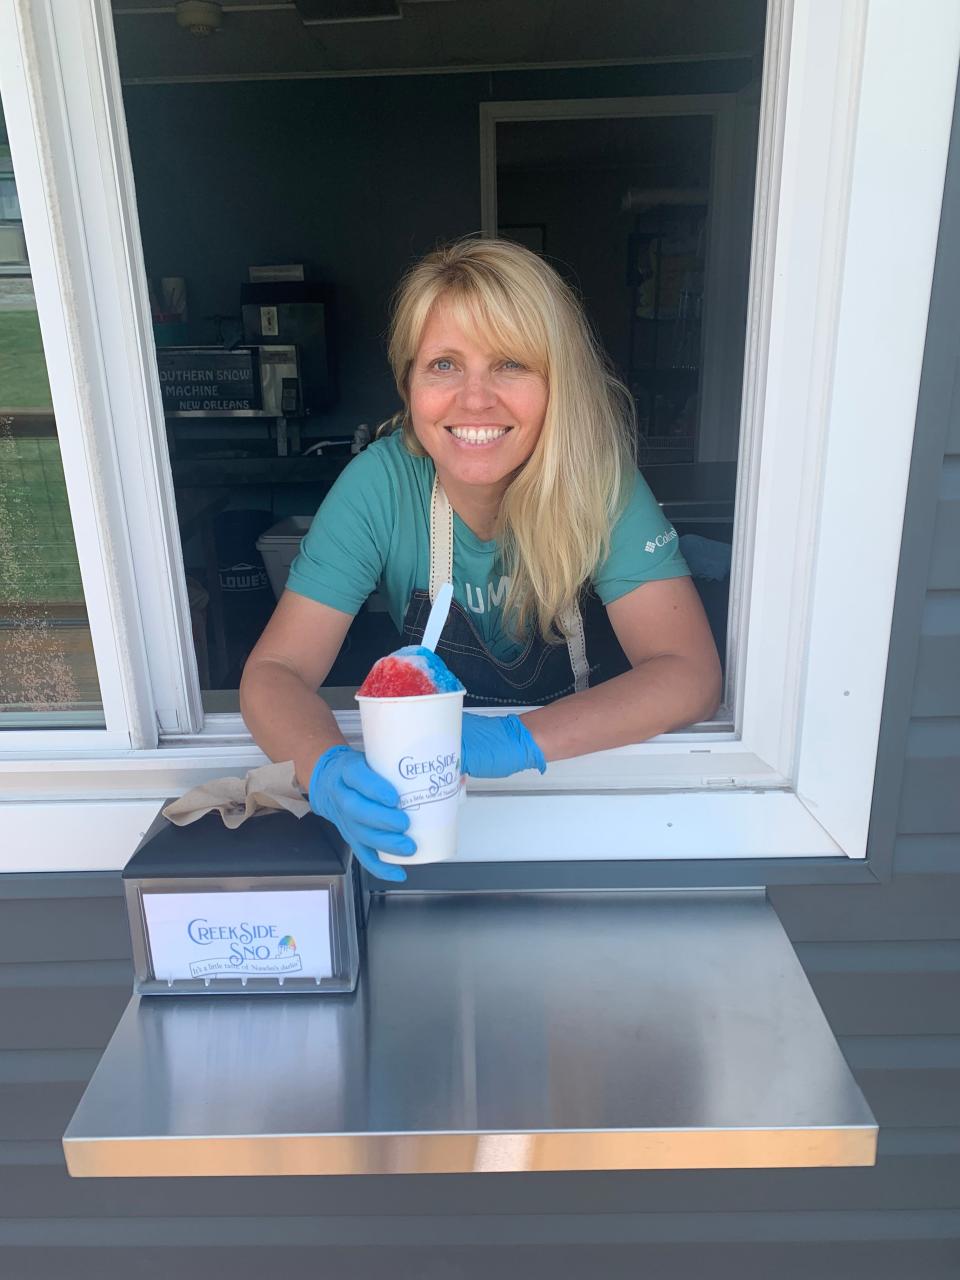 Tracy Heard shows off one of her favorite sno concoctions.